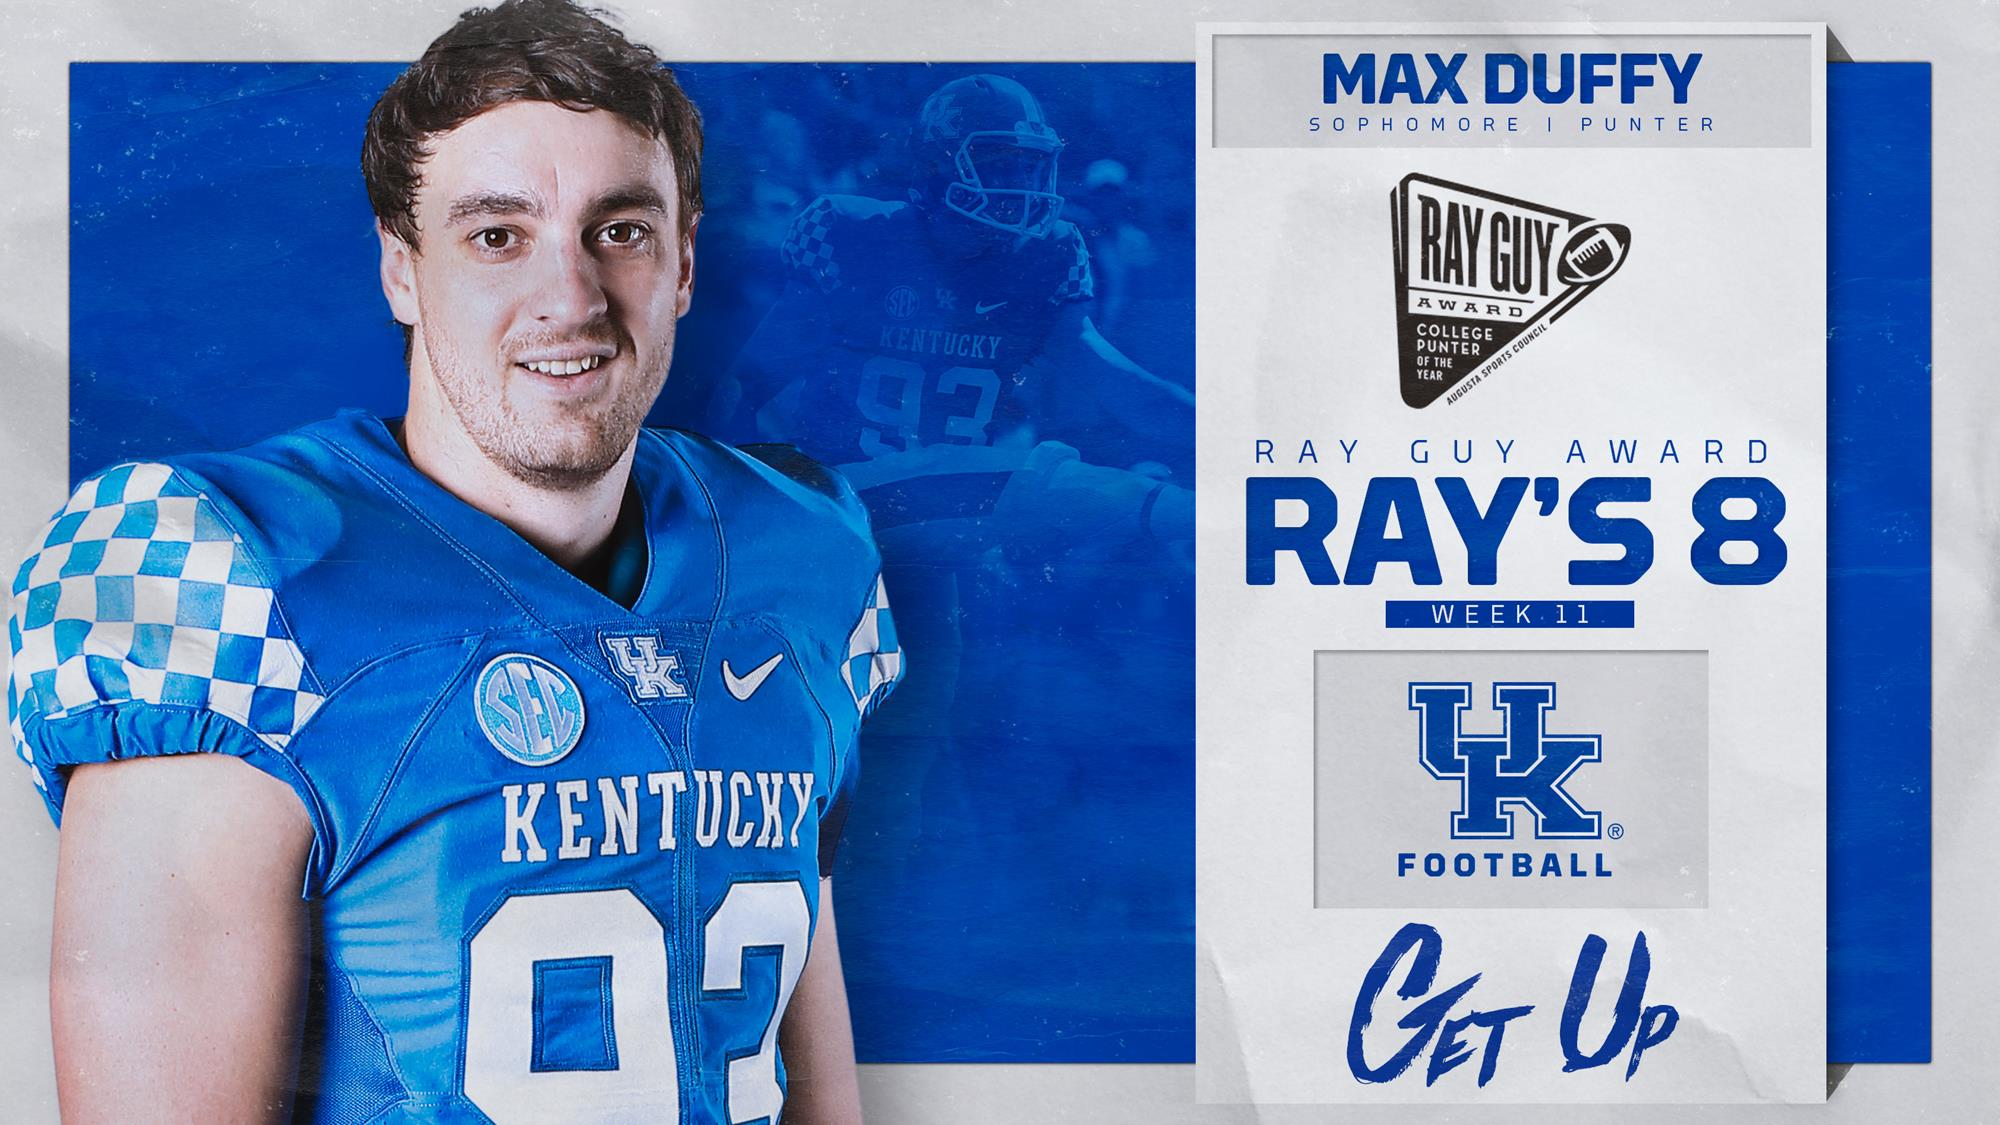 Max Duffy Named to Ray’s 8, Candidate for Punter of the Week